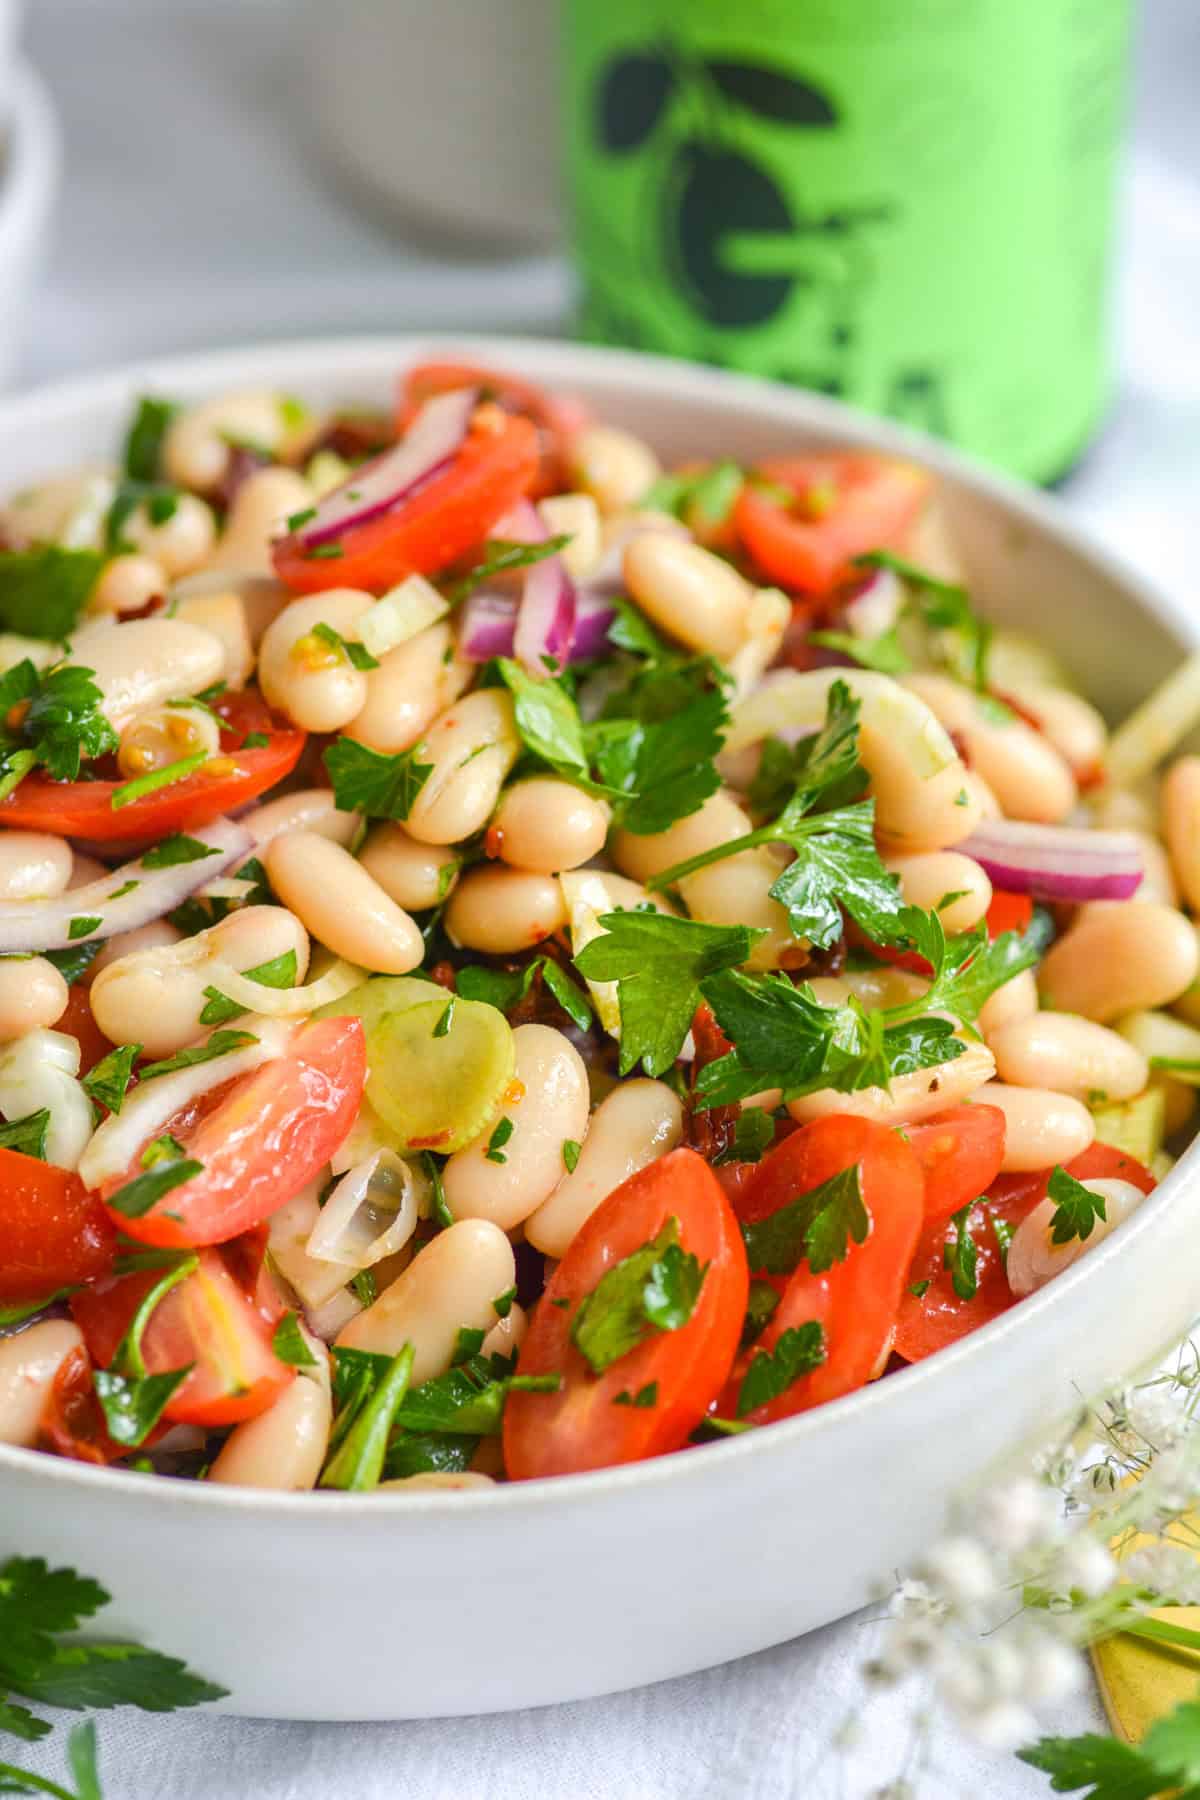 Tuscan cannellini bean salad with tomatoes and parsley in it in a large bowl on a white cloth.